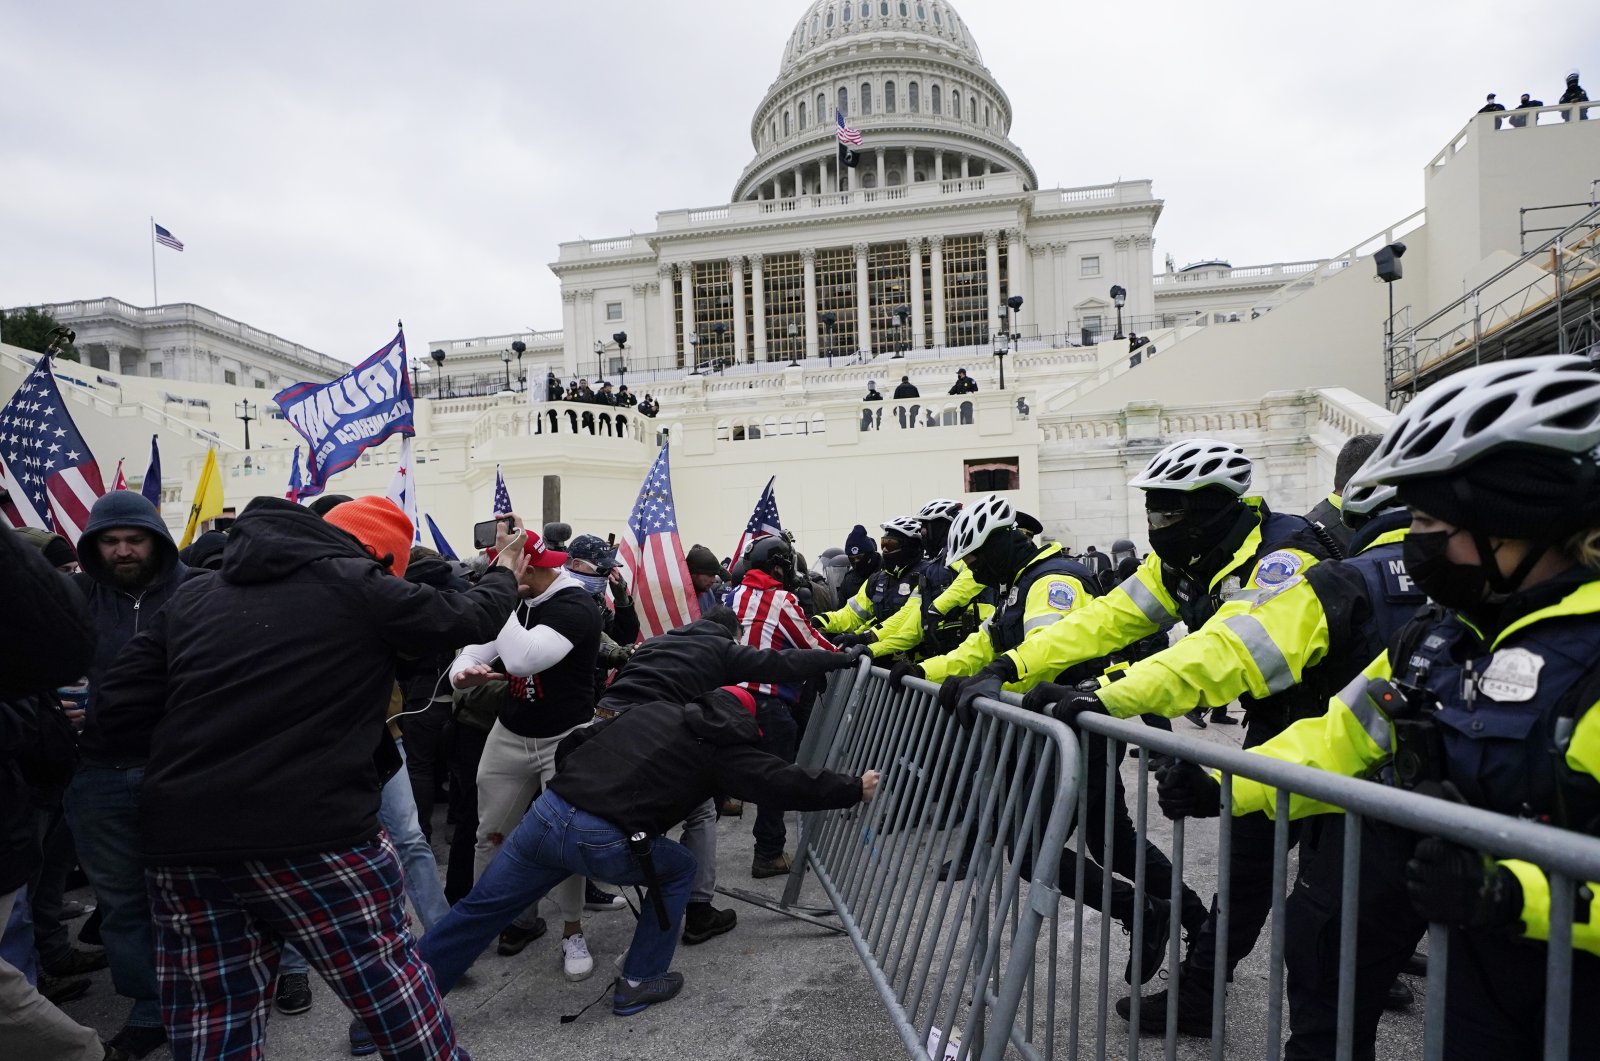 Trump supporters try to break through a police barrier at the Capitol in Washington, U.S., Jan. 6, 2021. With riot cases flooding into Washington’s federal court, the Justice Department is under pressure to quickly resolve the least serious cases. (AP Photo)